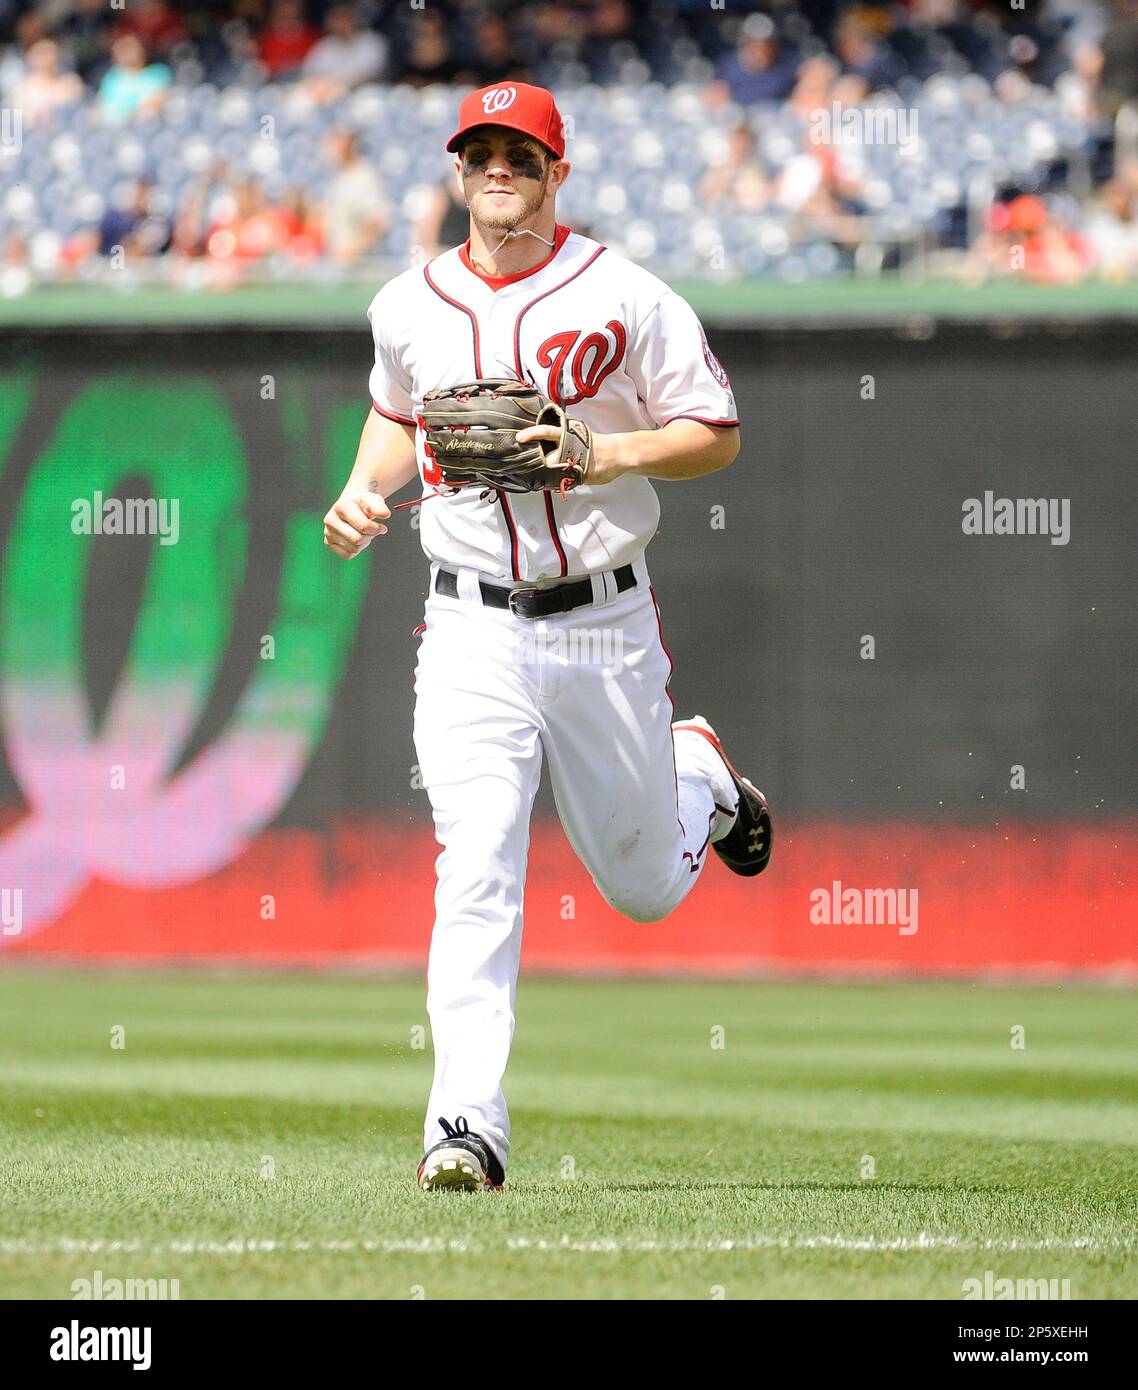 Washington Nationals Bryce Harper reacts in the dugout during game against  the New York Mets in the 3rd inning of game on Opening Day at Nationals  Park on April 6, 2015 in